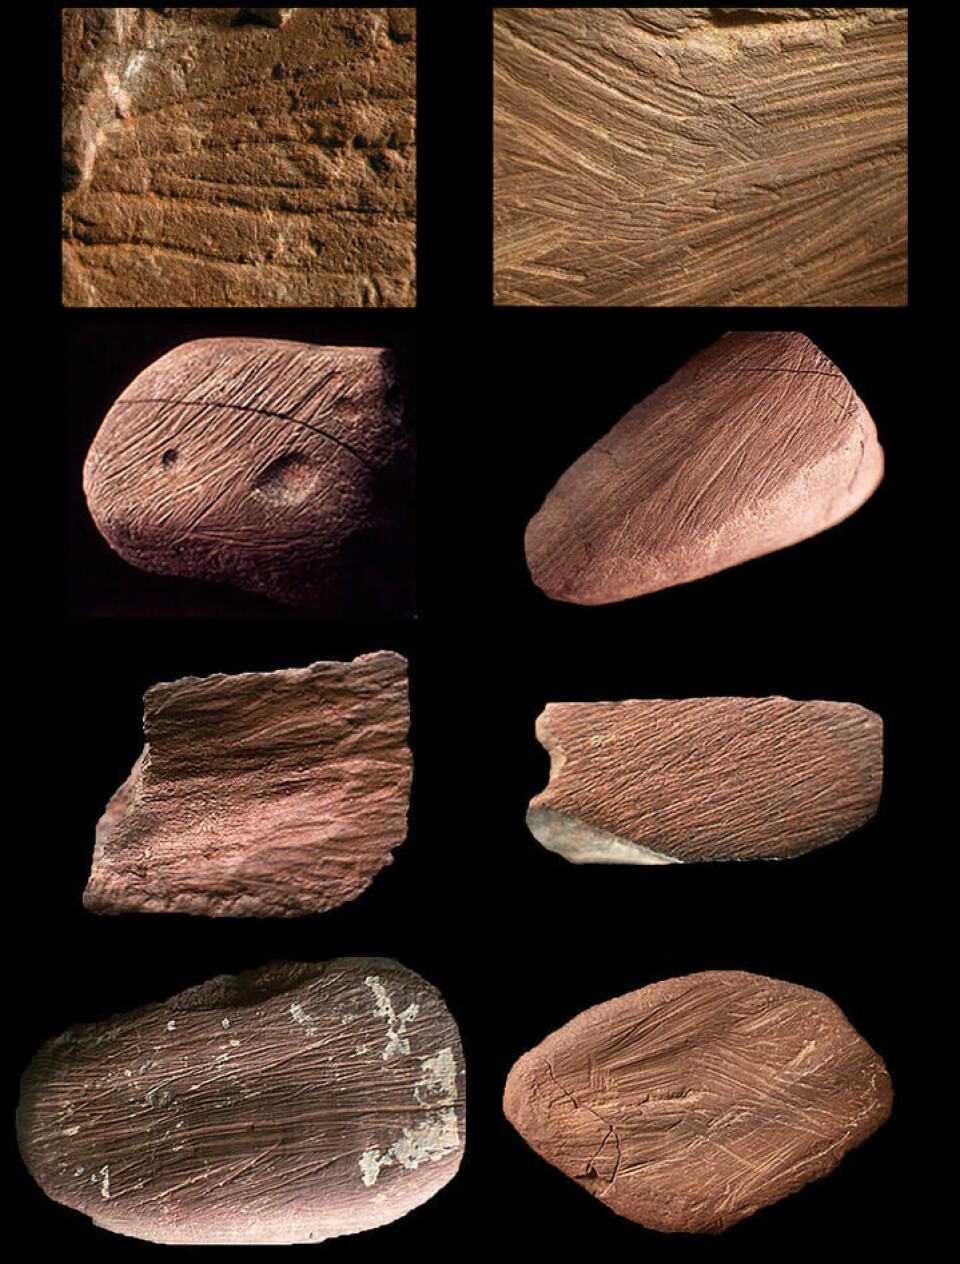 TRACES FROM EARLY HUMANS: Other pieces of ochre from Blombos showing traces of human use.